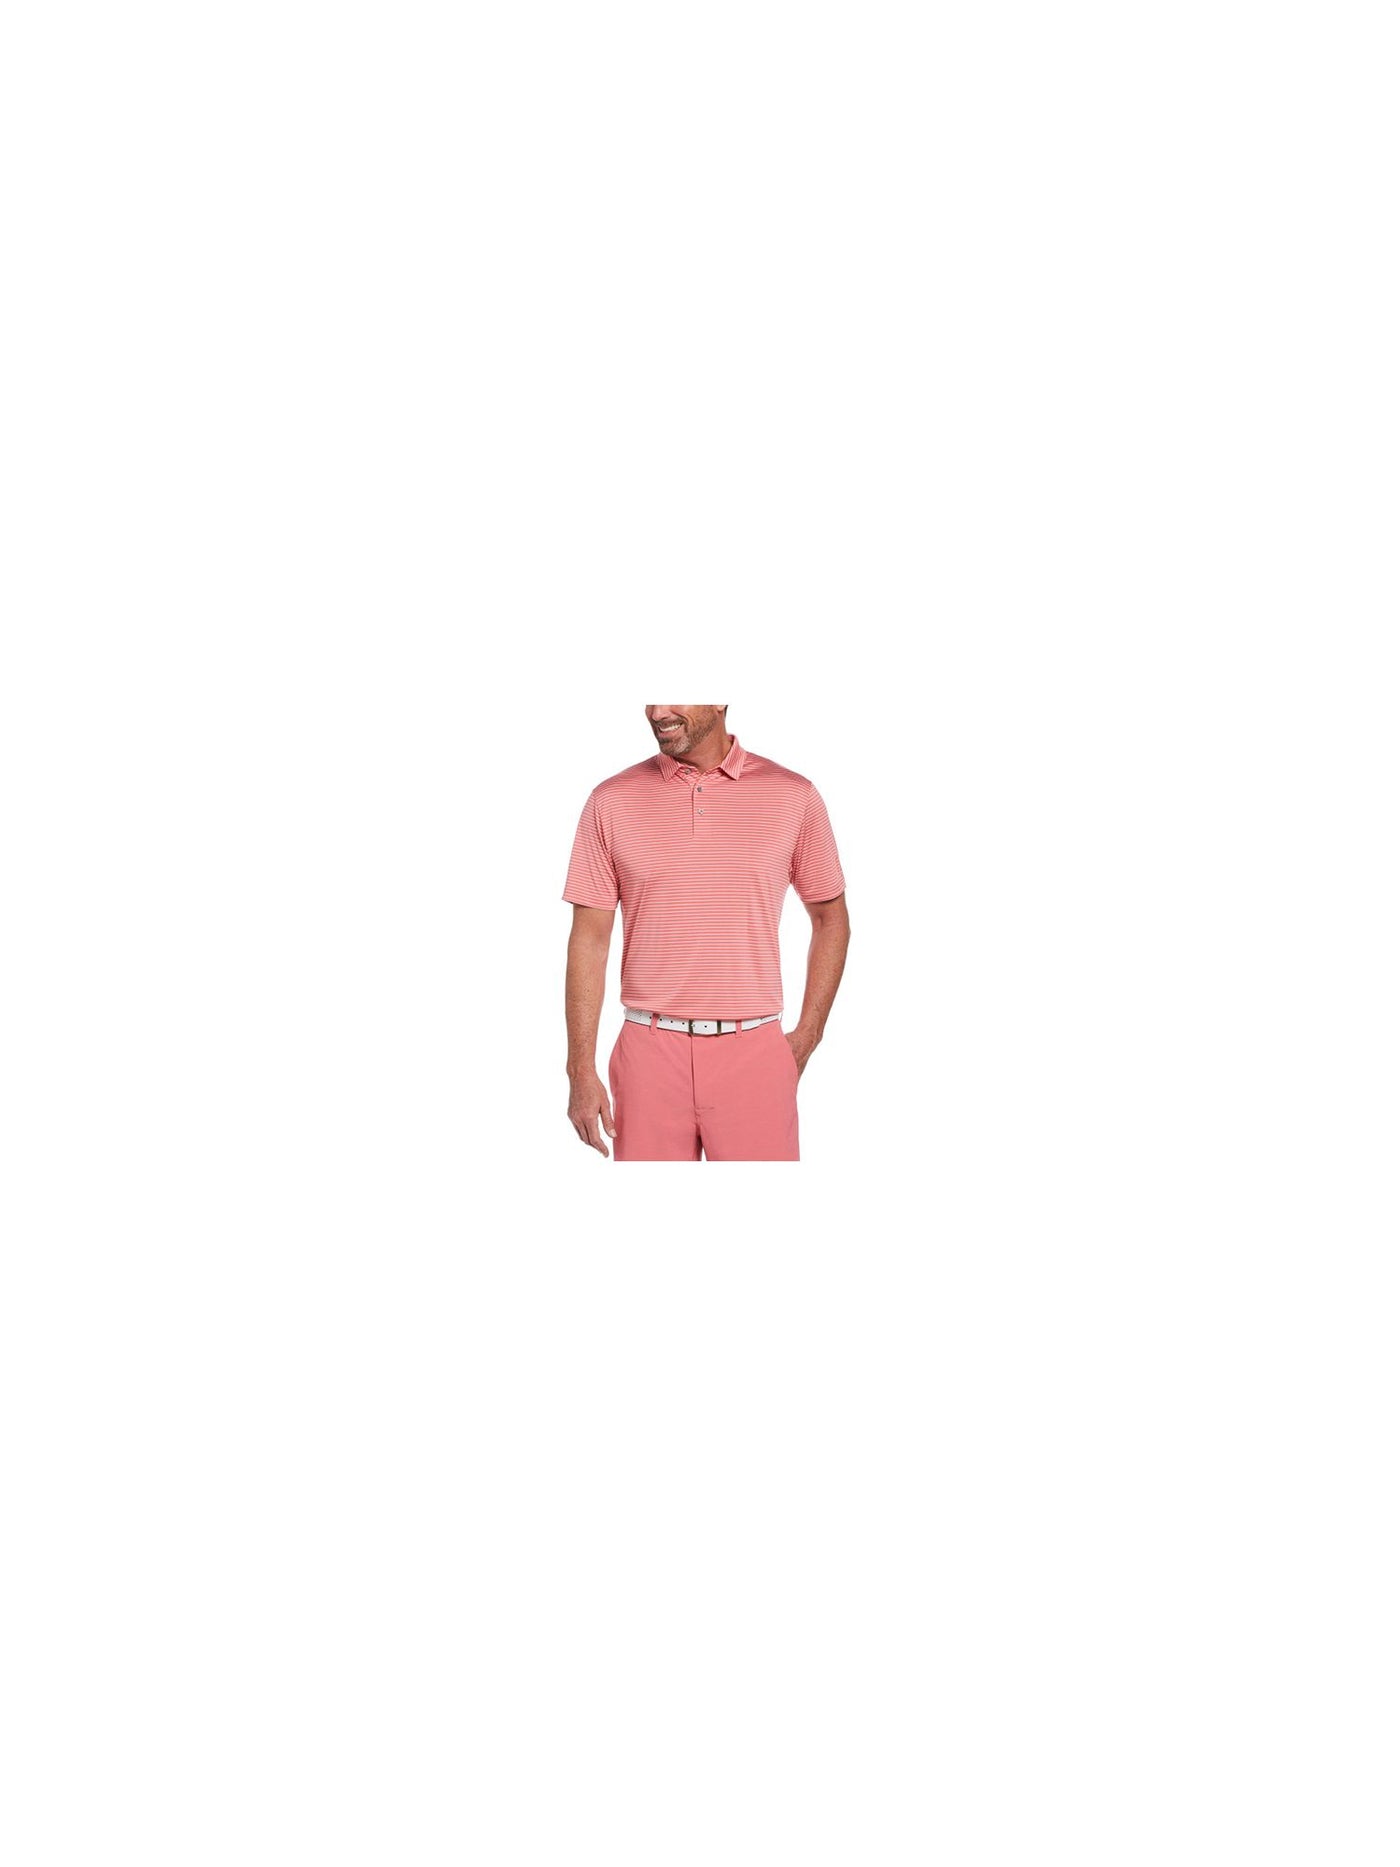 HYBRID APPAREL Mens Single Feeder Pink Striped Classic Fit Moisture Wicking Polo XXL